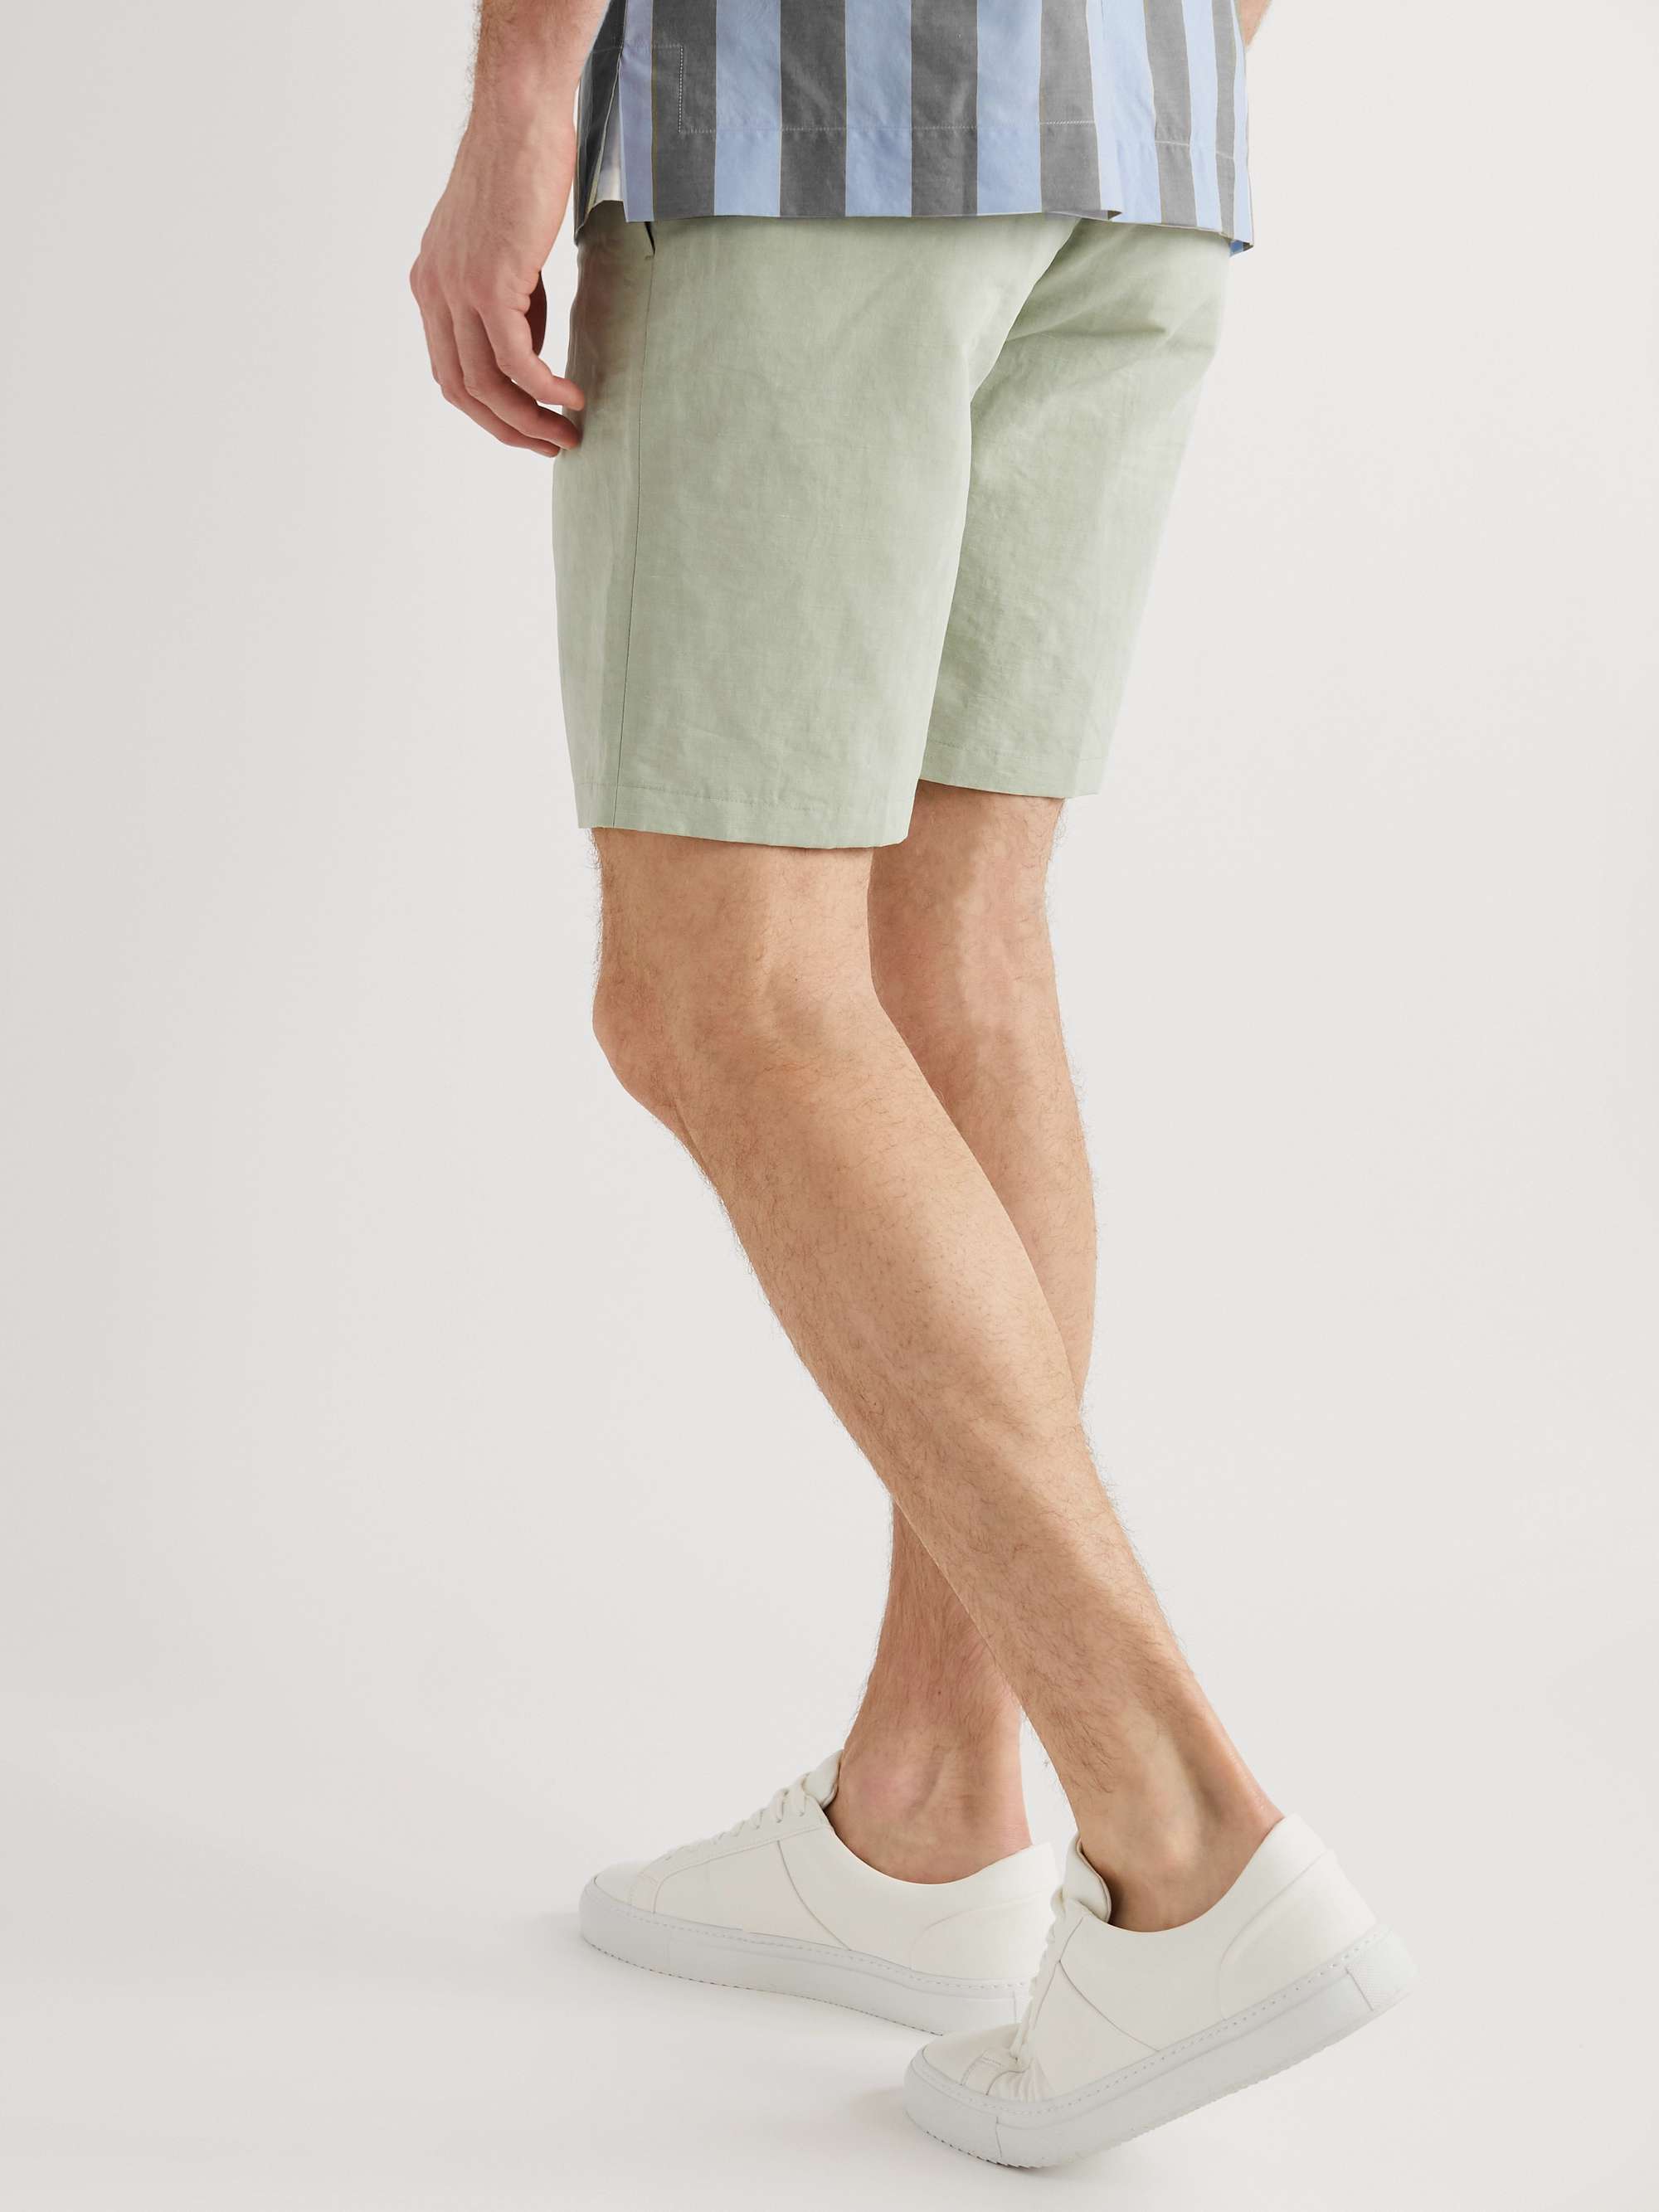 PAUL SMITH Slim-Fit Cotton and Linen-Blend Shorts